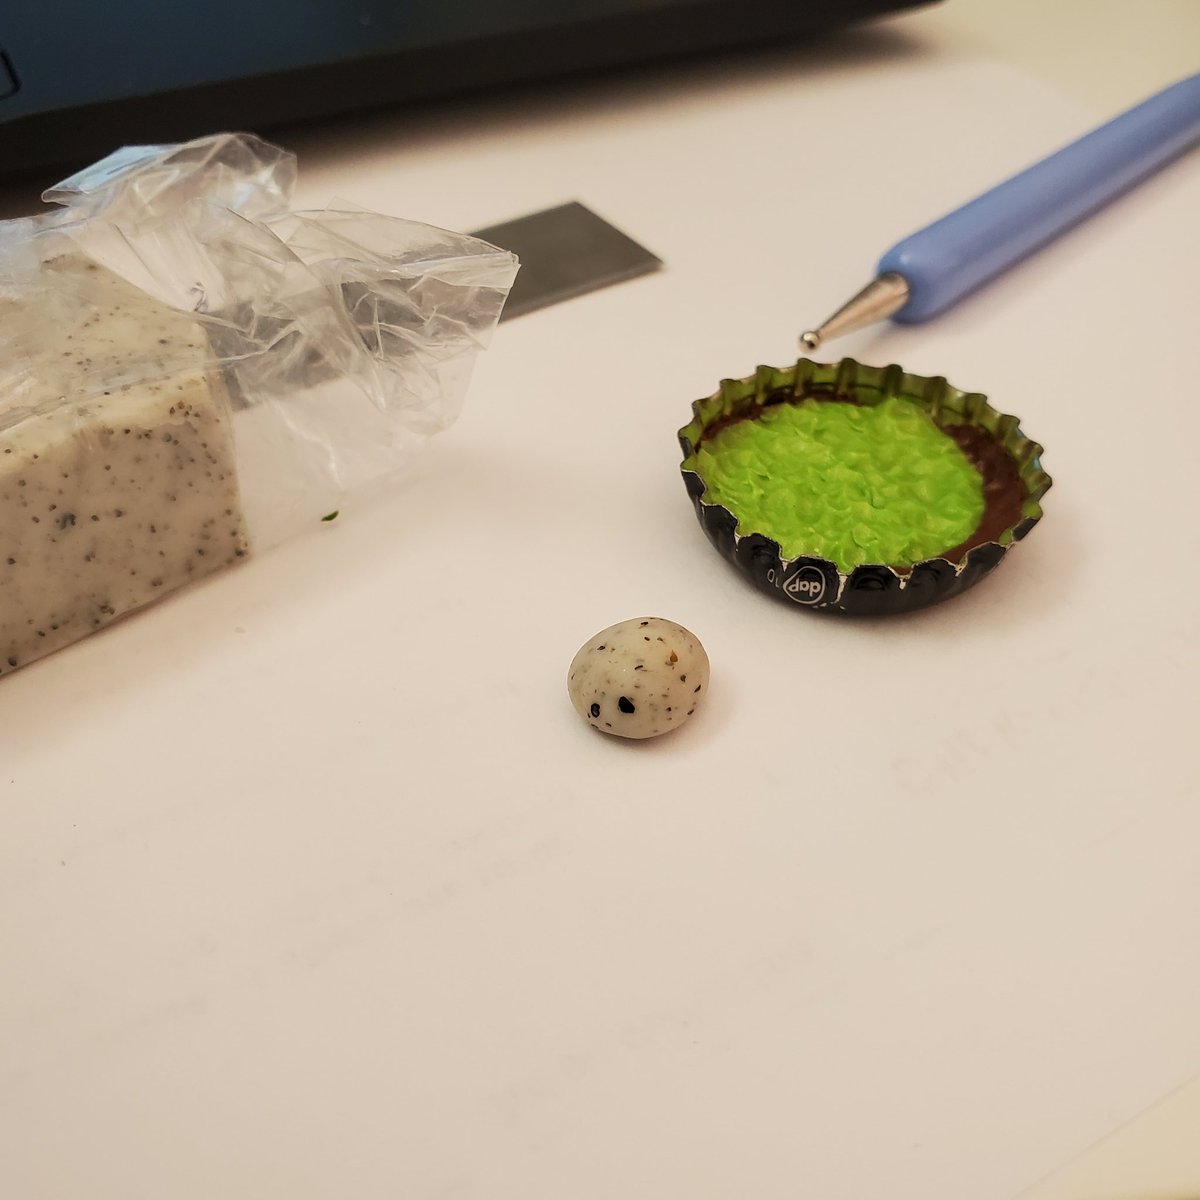 Granite clay is my fave. It's so beautiful. Roll it around your fingers until you have a rock/pebble-like shape. Flatten one side against the table, then place it anywhere in your garden.